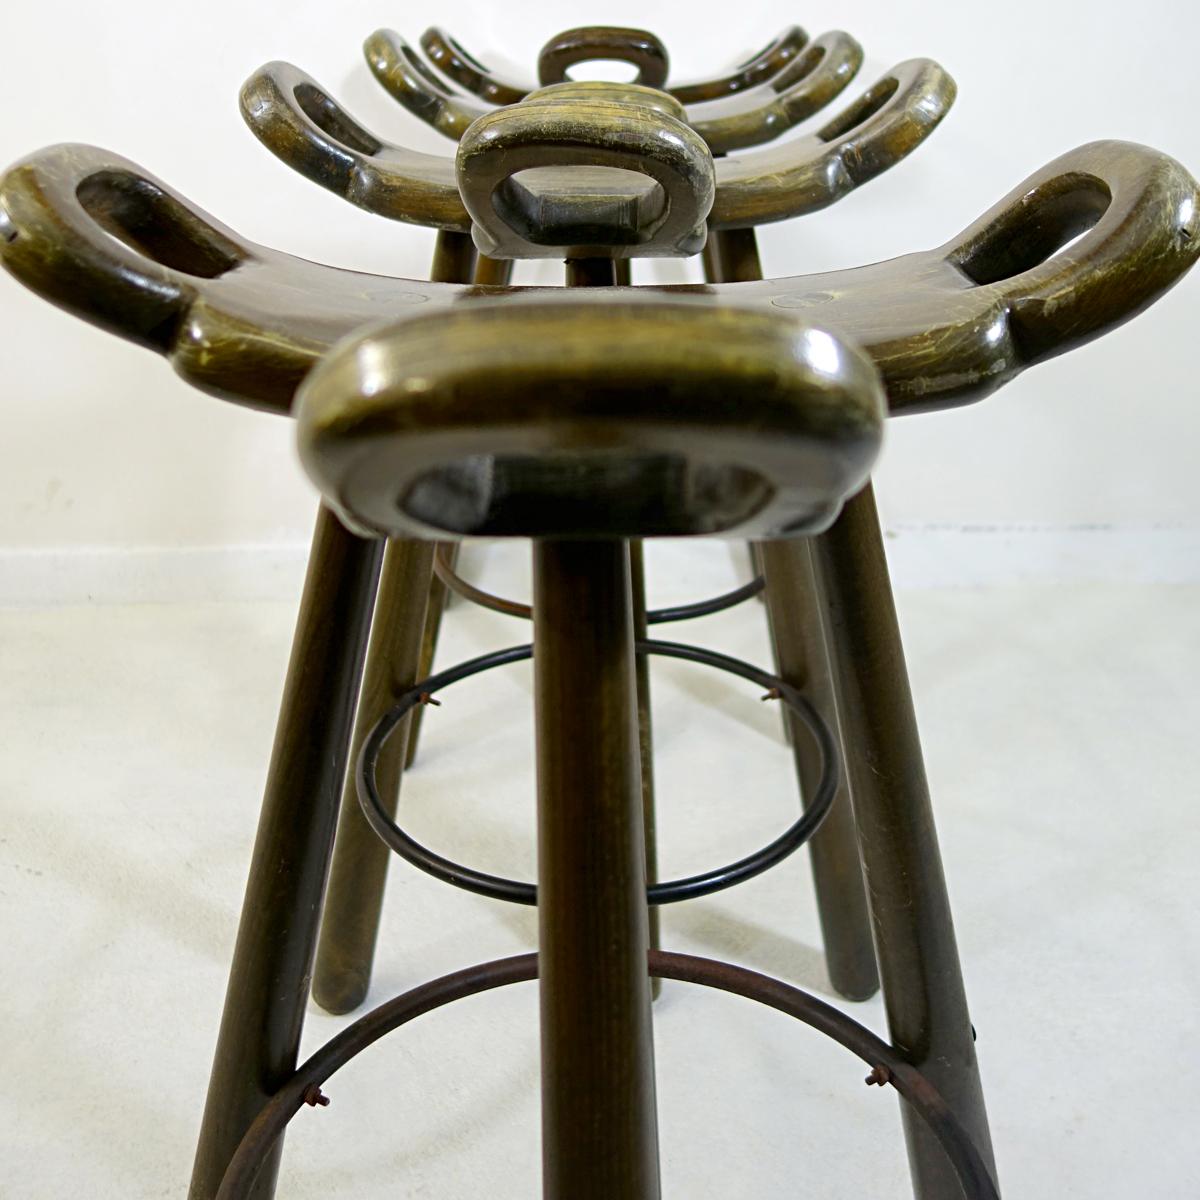 20th Century Brutalist Bar Stools in the Style of the Marbella Stool by Sergio Rodrigues